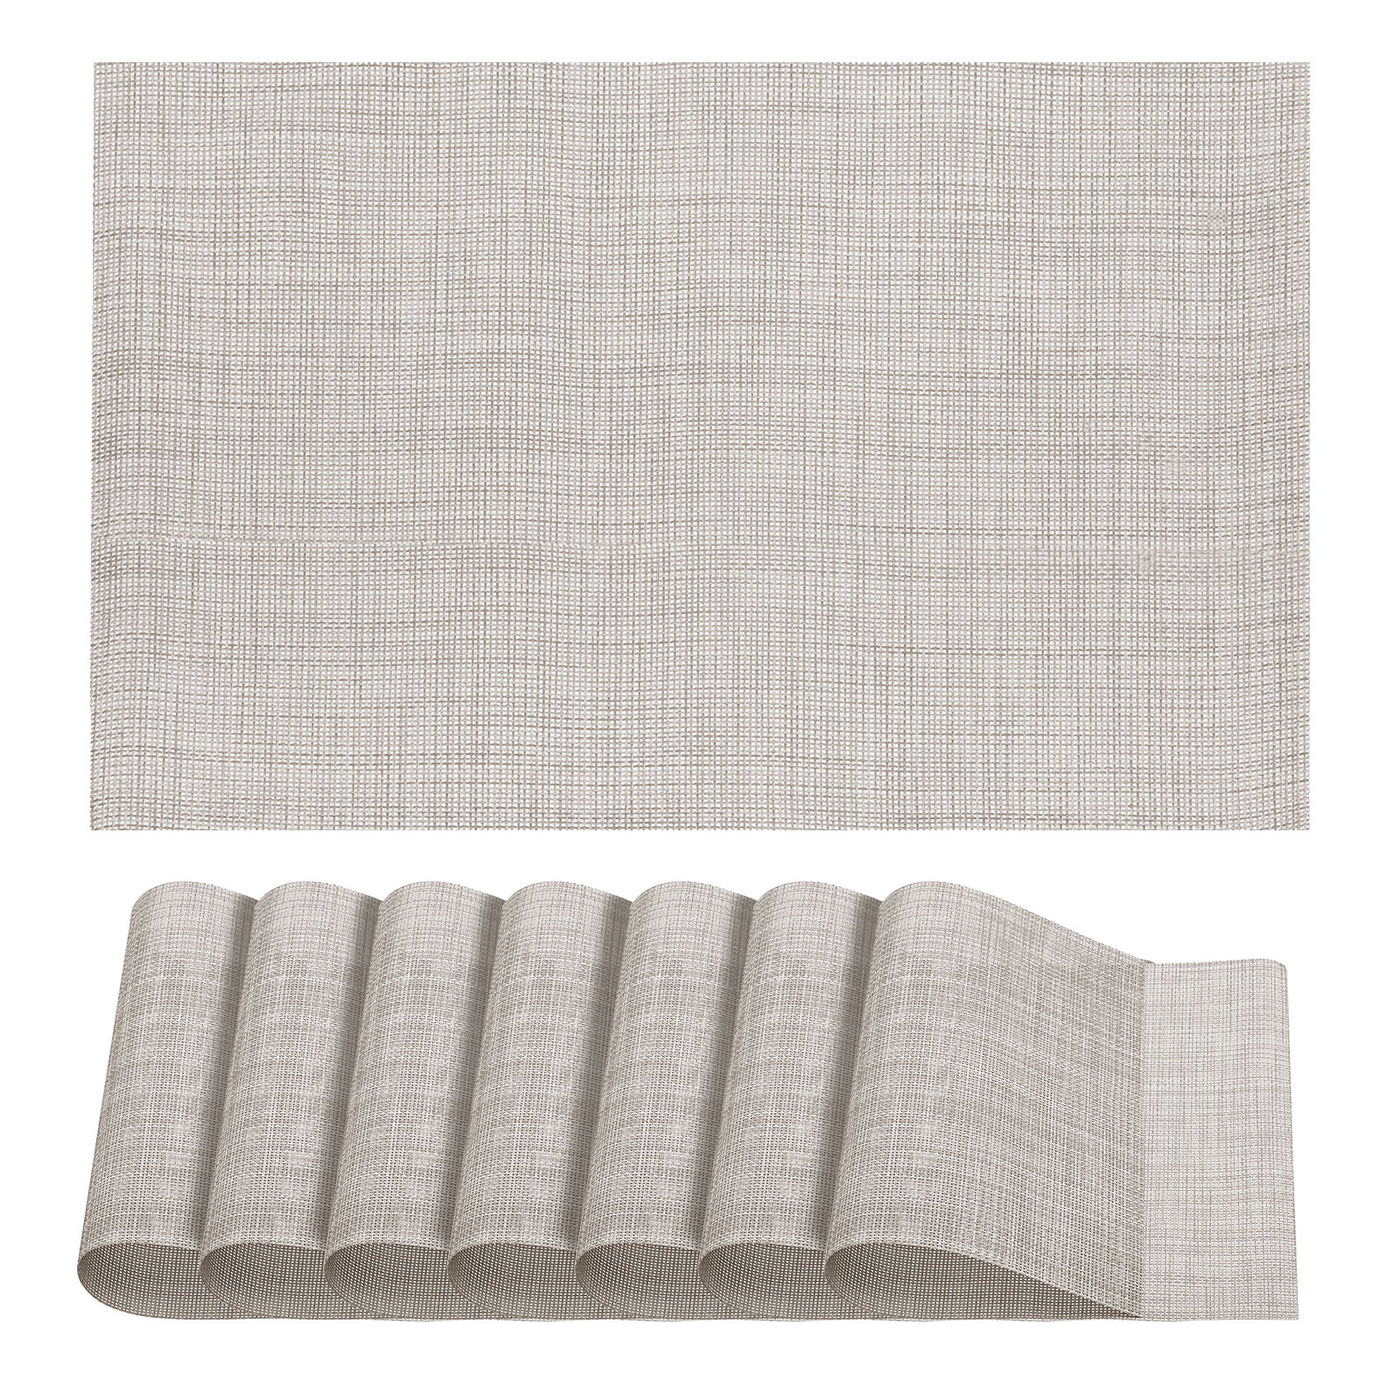 uxcell Uxcell Place Mats, 450x300mm Table Mats Set of 8 PVC Washable Woven Placemat Beige